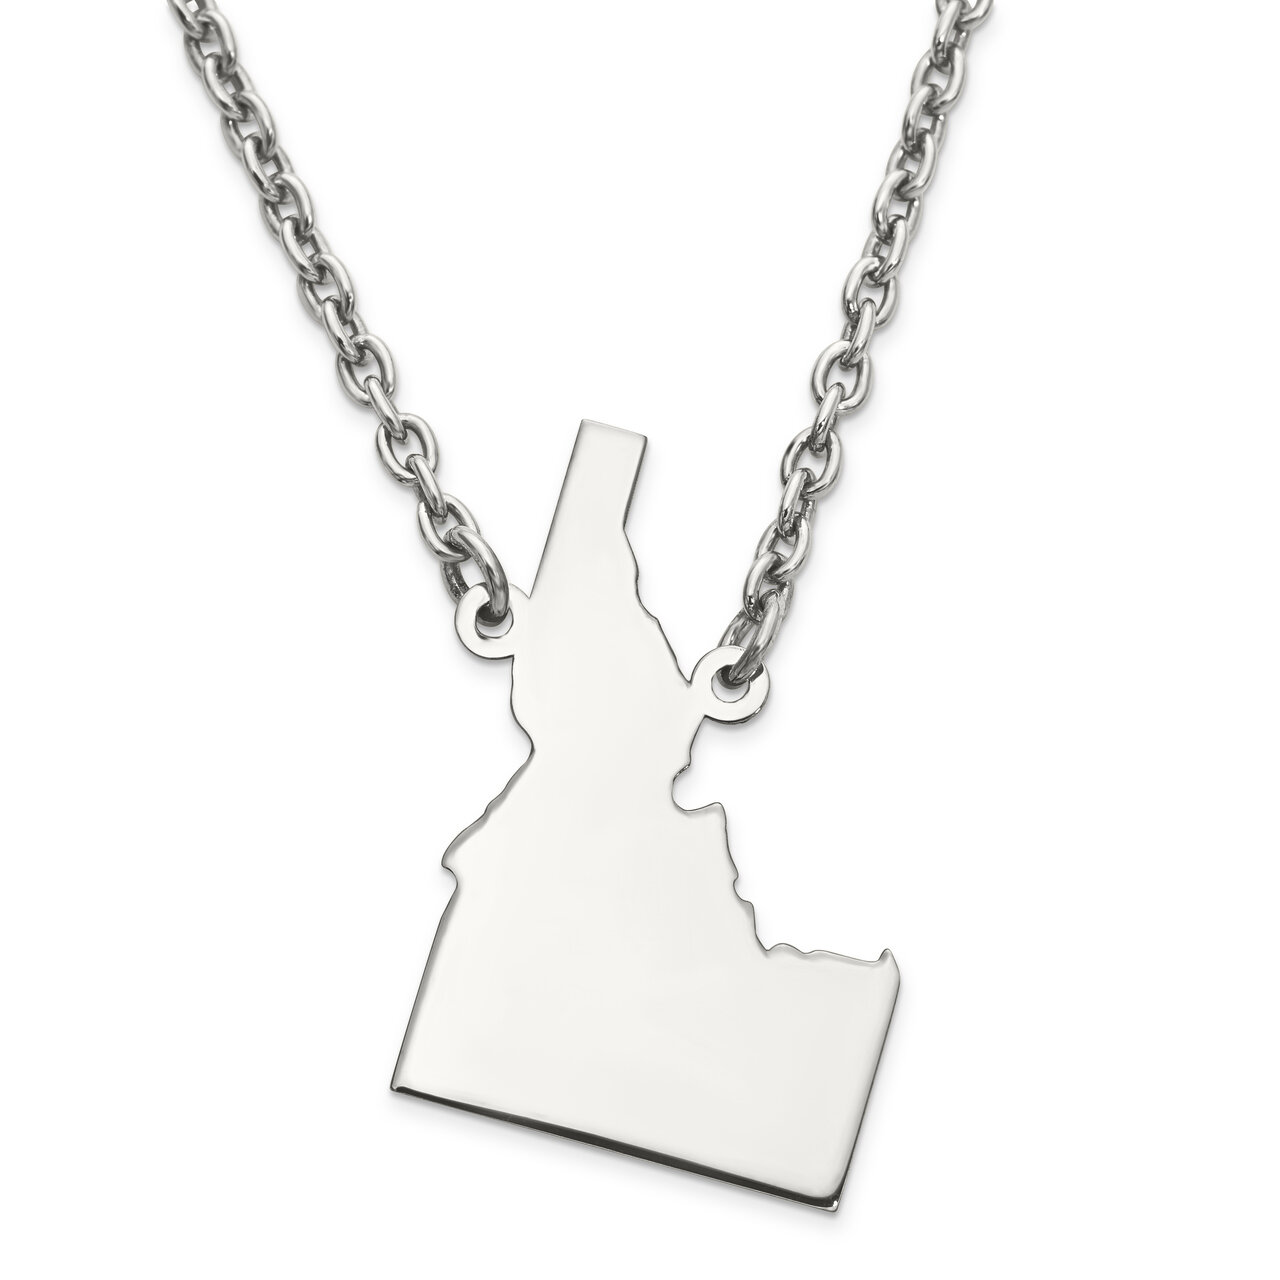 Idaho State Pendant Necklace with Chain Sterling Silver Engravable XNA706SS-ID